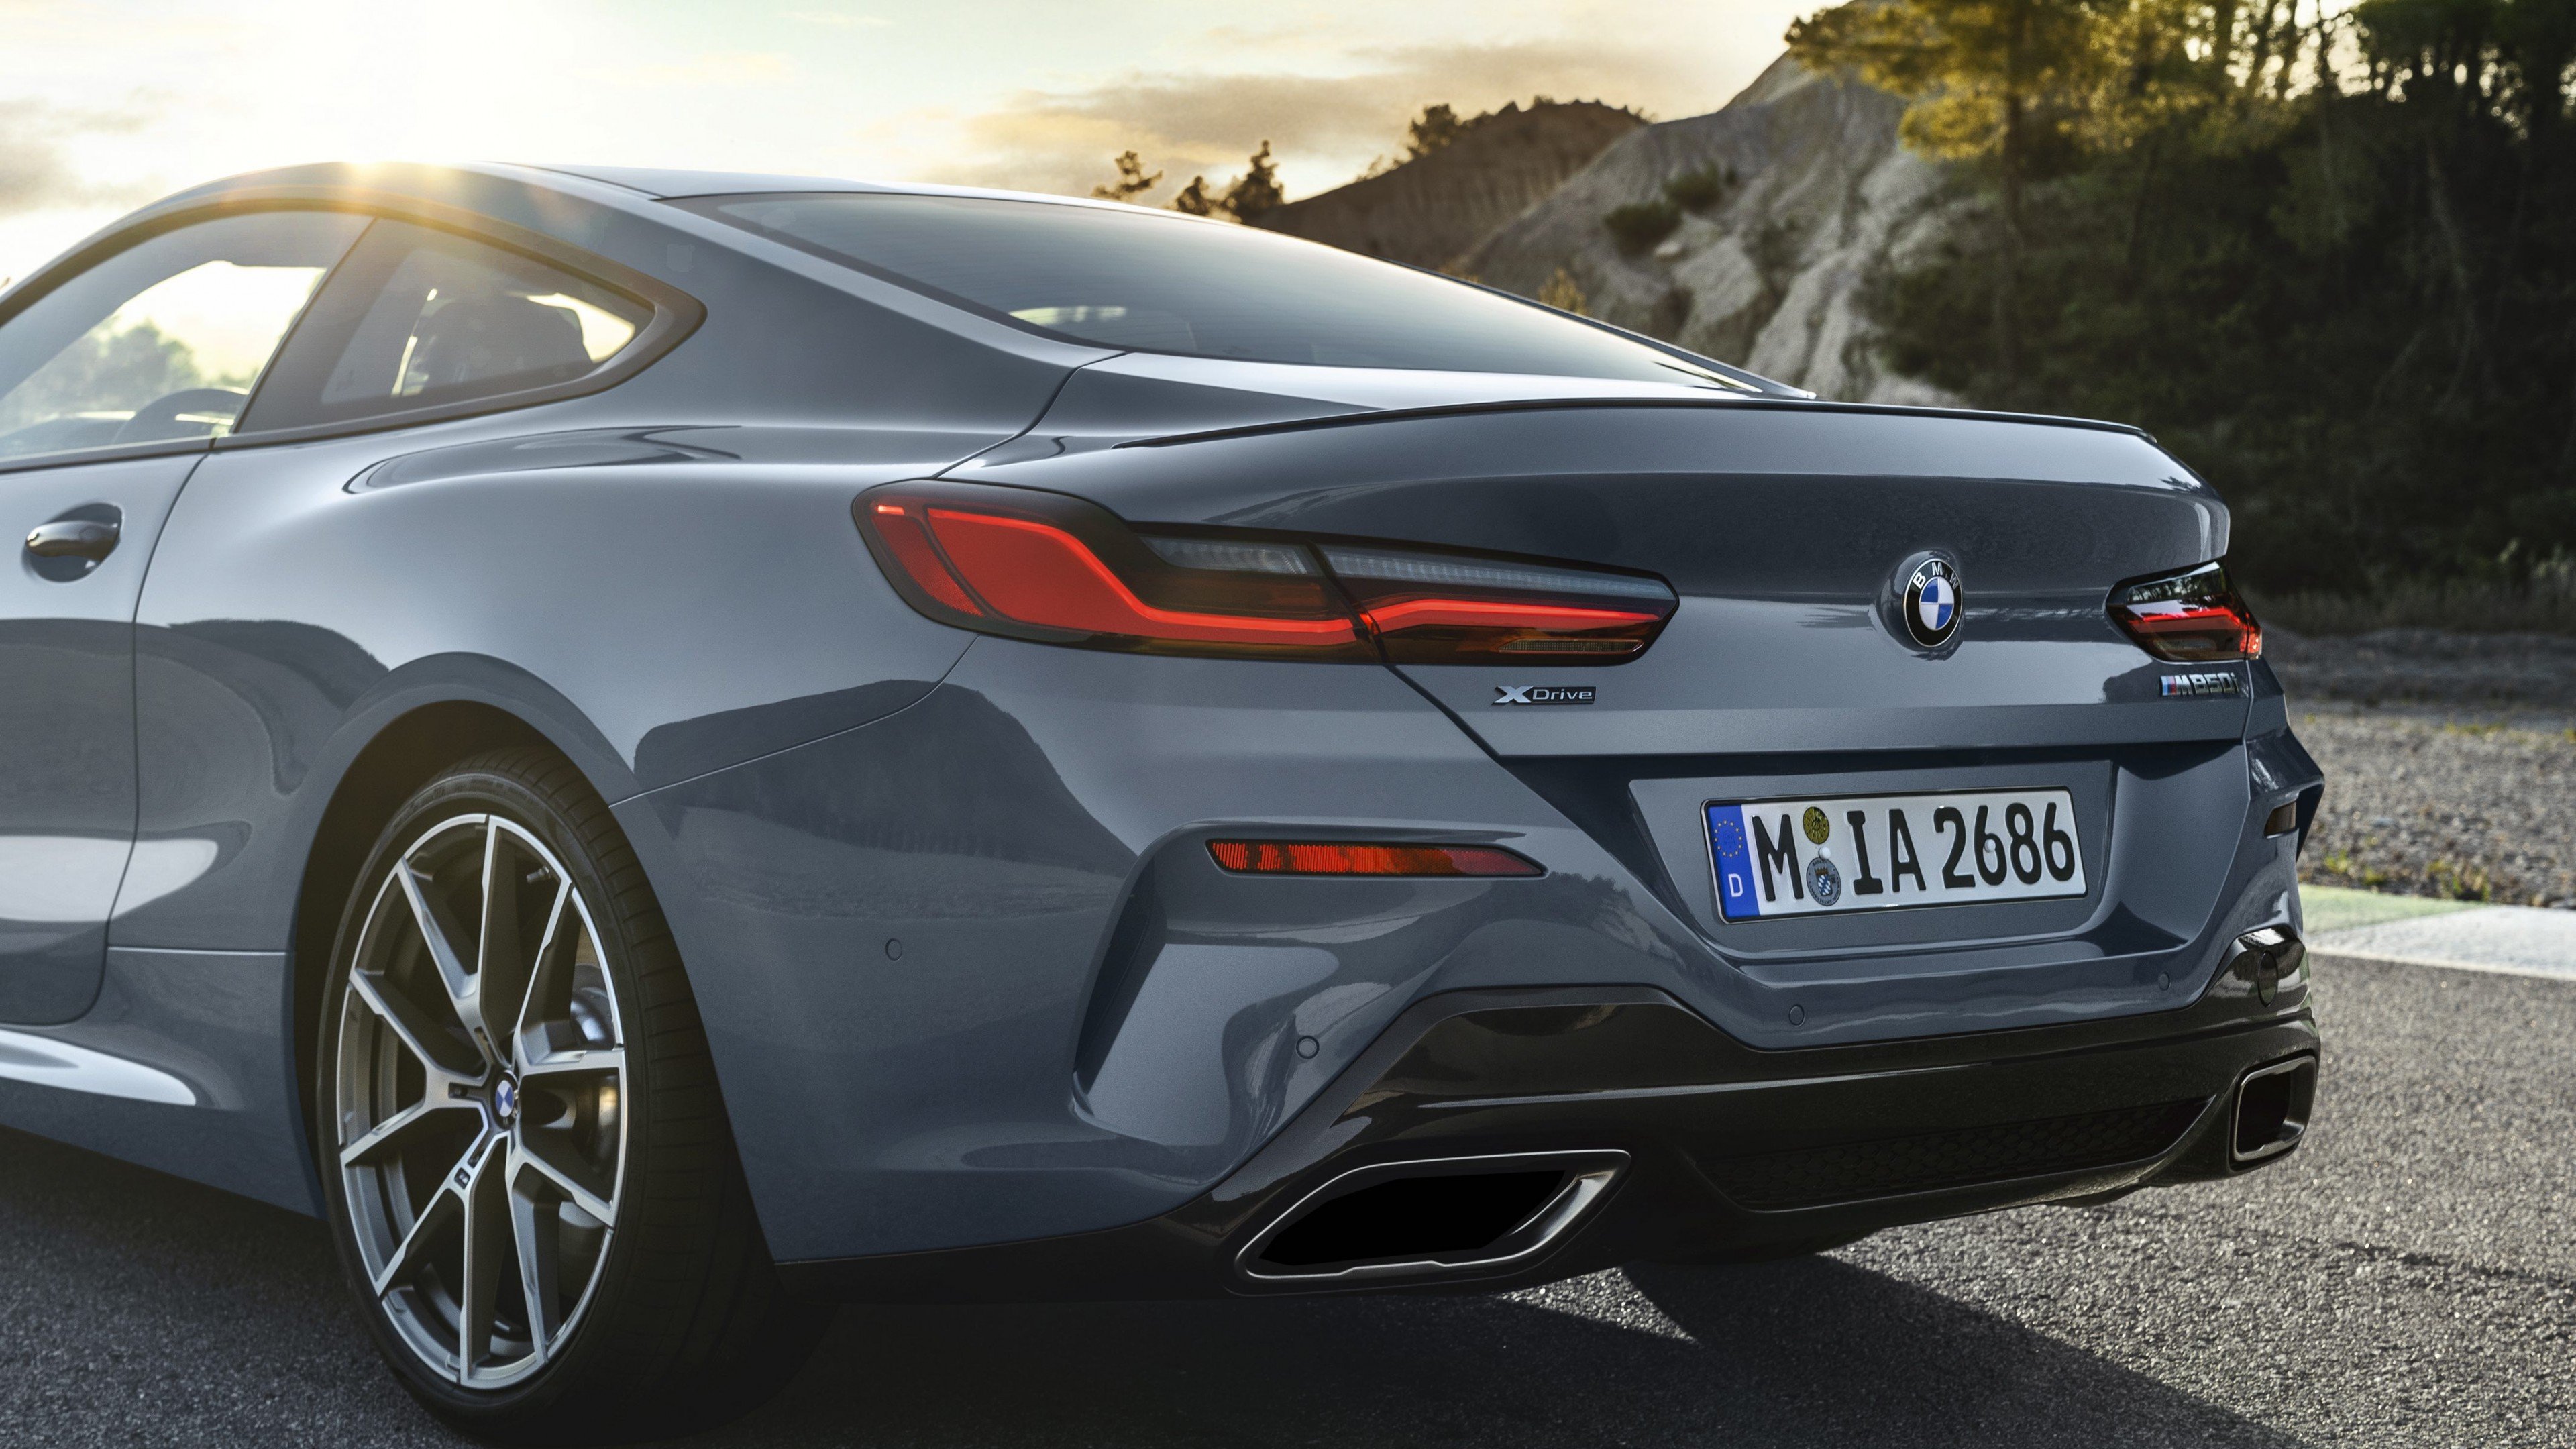 Wallpaper BMW 8 Series Coupe, 2019 Cars, 4K, Cars & Bikes